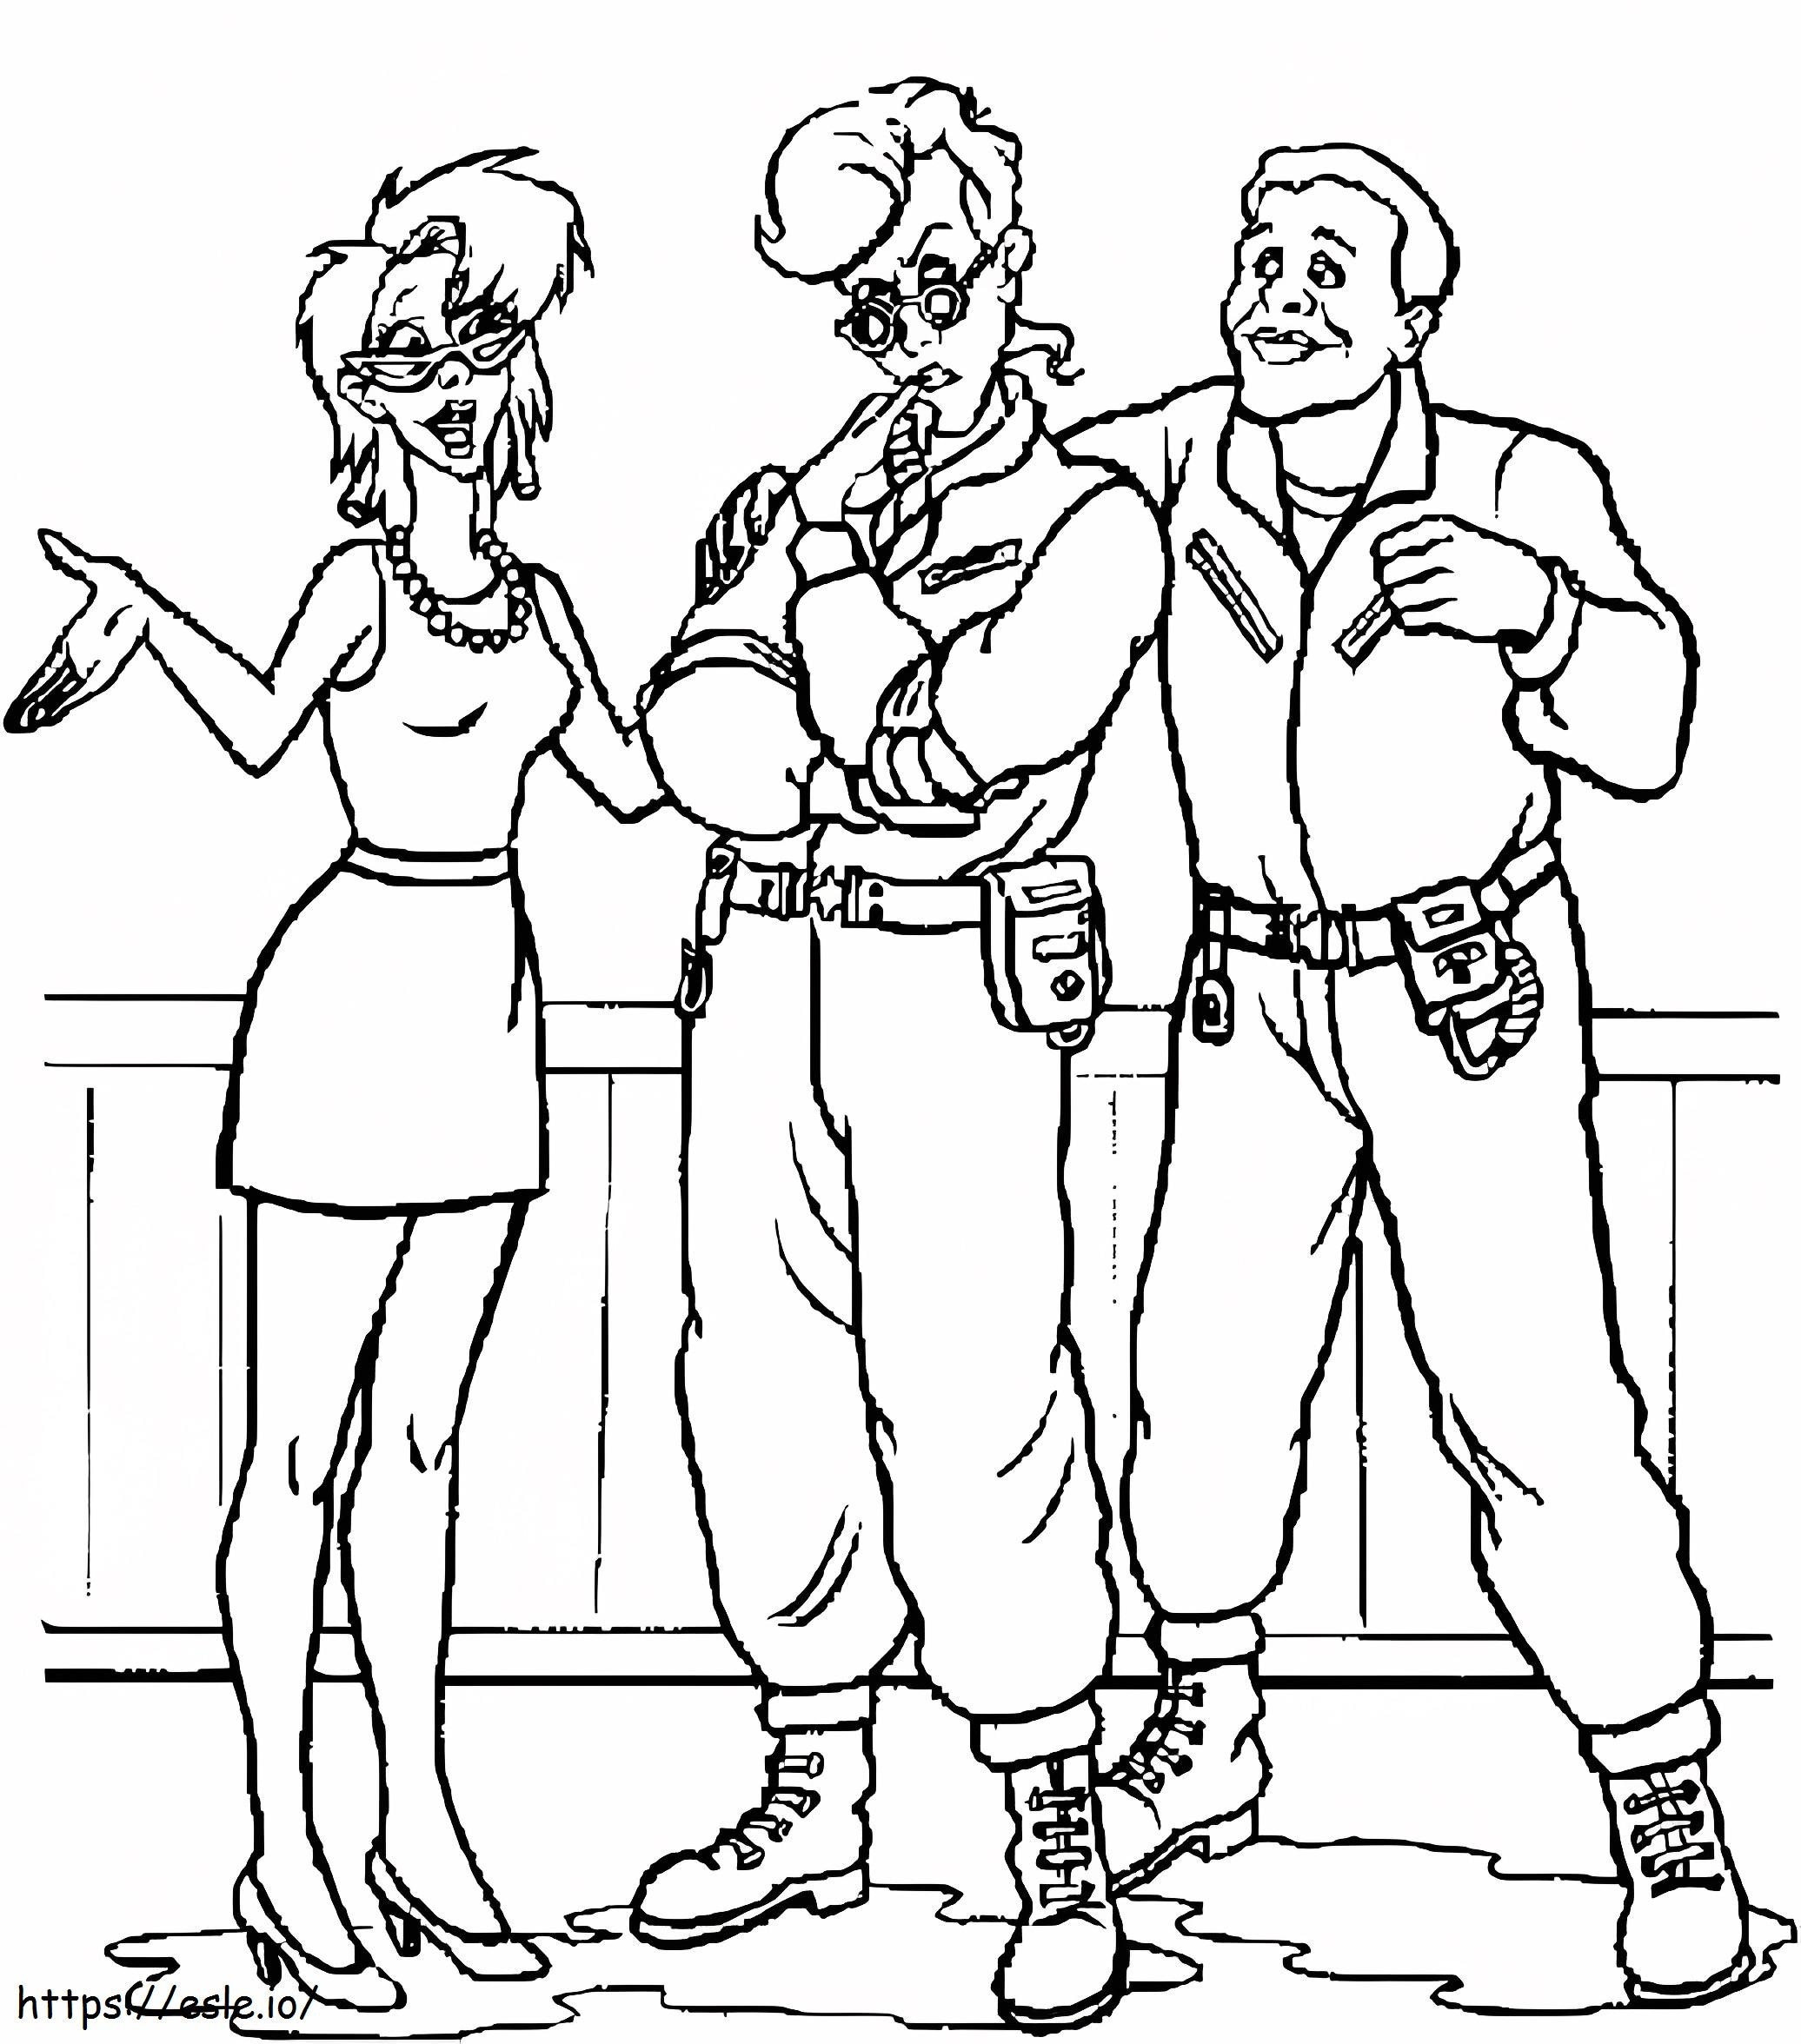 Drawing Three Ghostbusters Characters coloring page